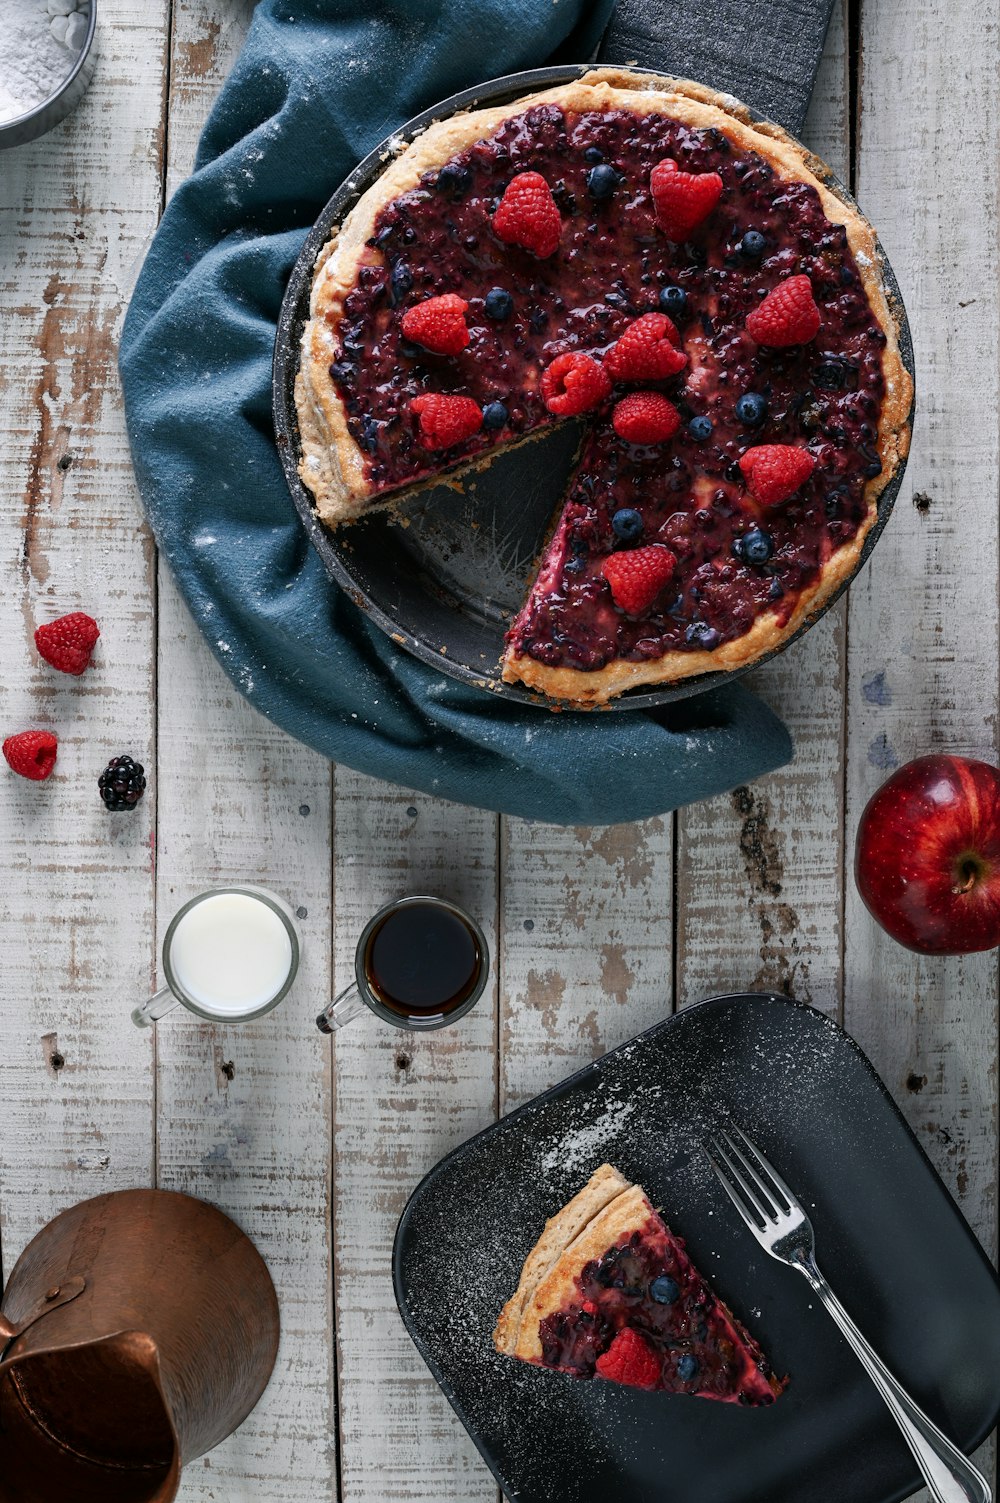 cooked pie with blueberries and strawberries